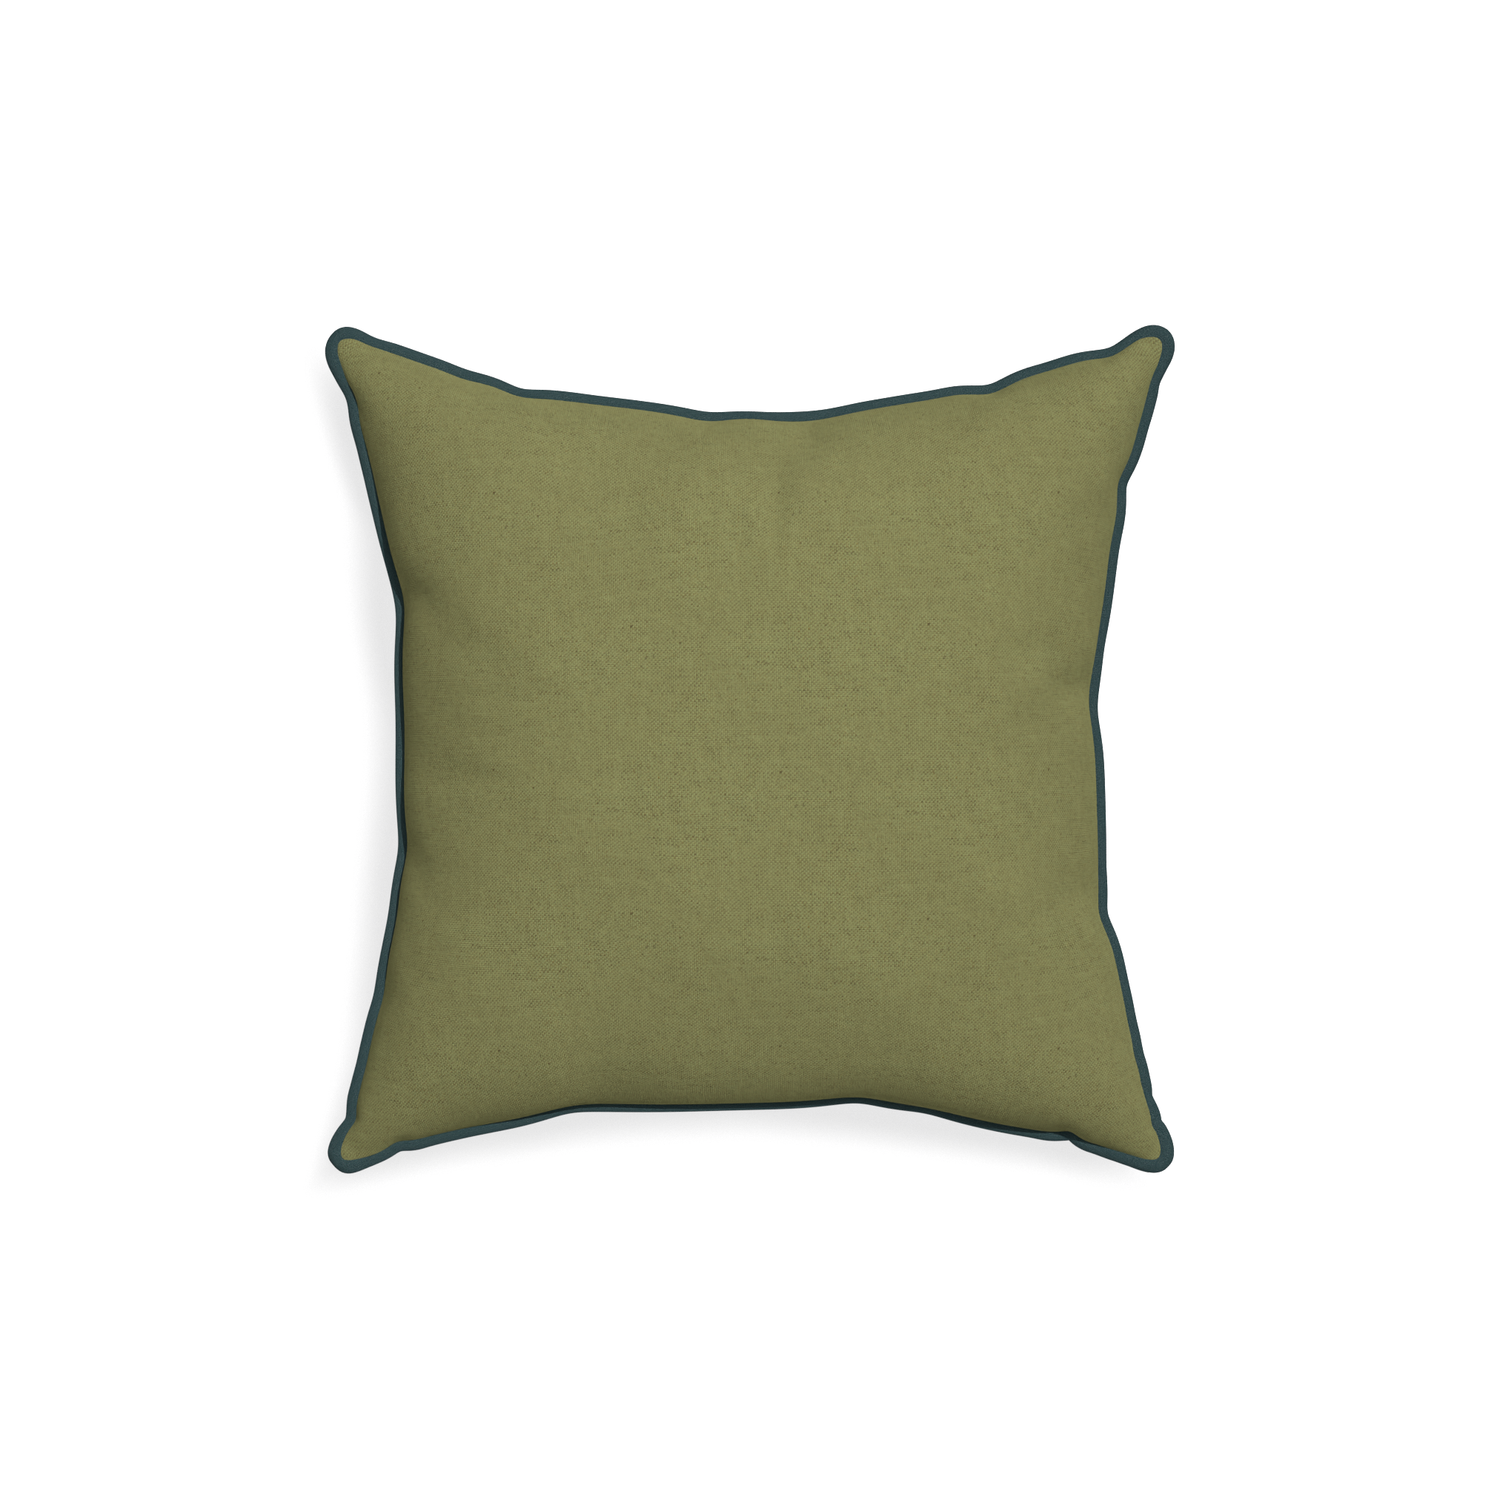 18-square moss custom moss greenpillow with p piping on white background